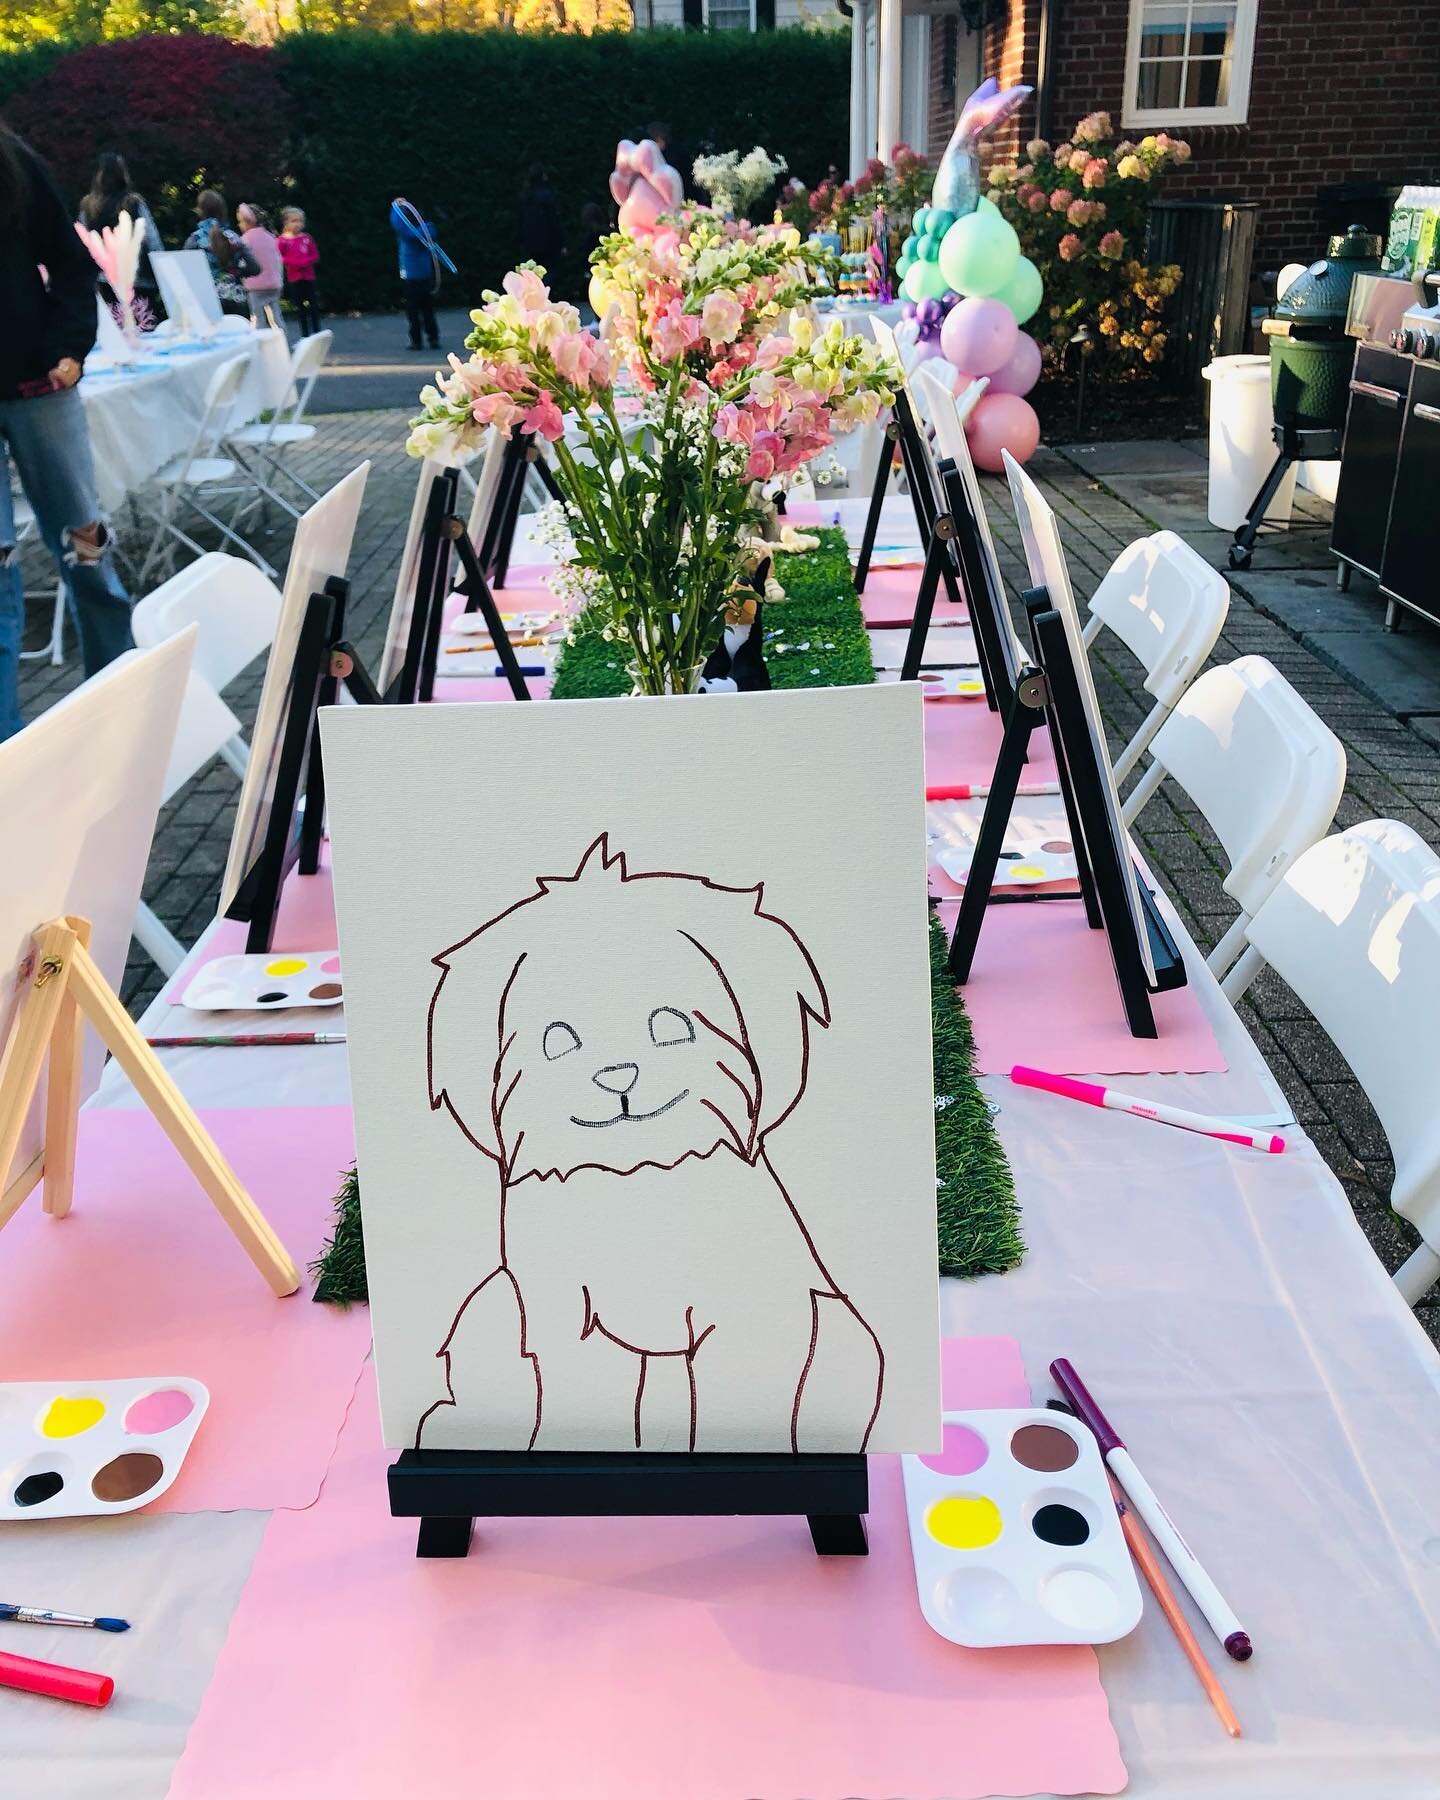 Paint your pet is quickly becoming one of our most popular themes! Send us your pets pic and see what we come up with! Special shout out to @planmypartysj for the fab decor!